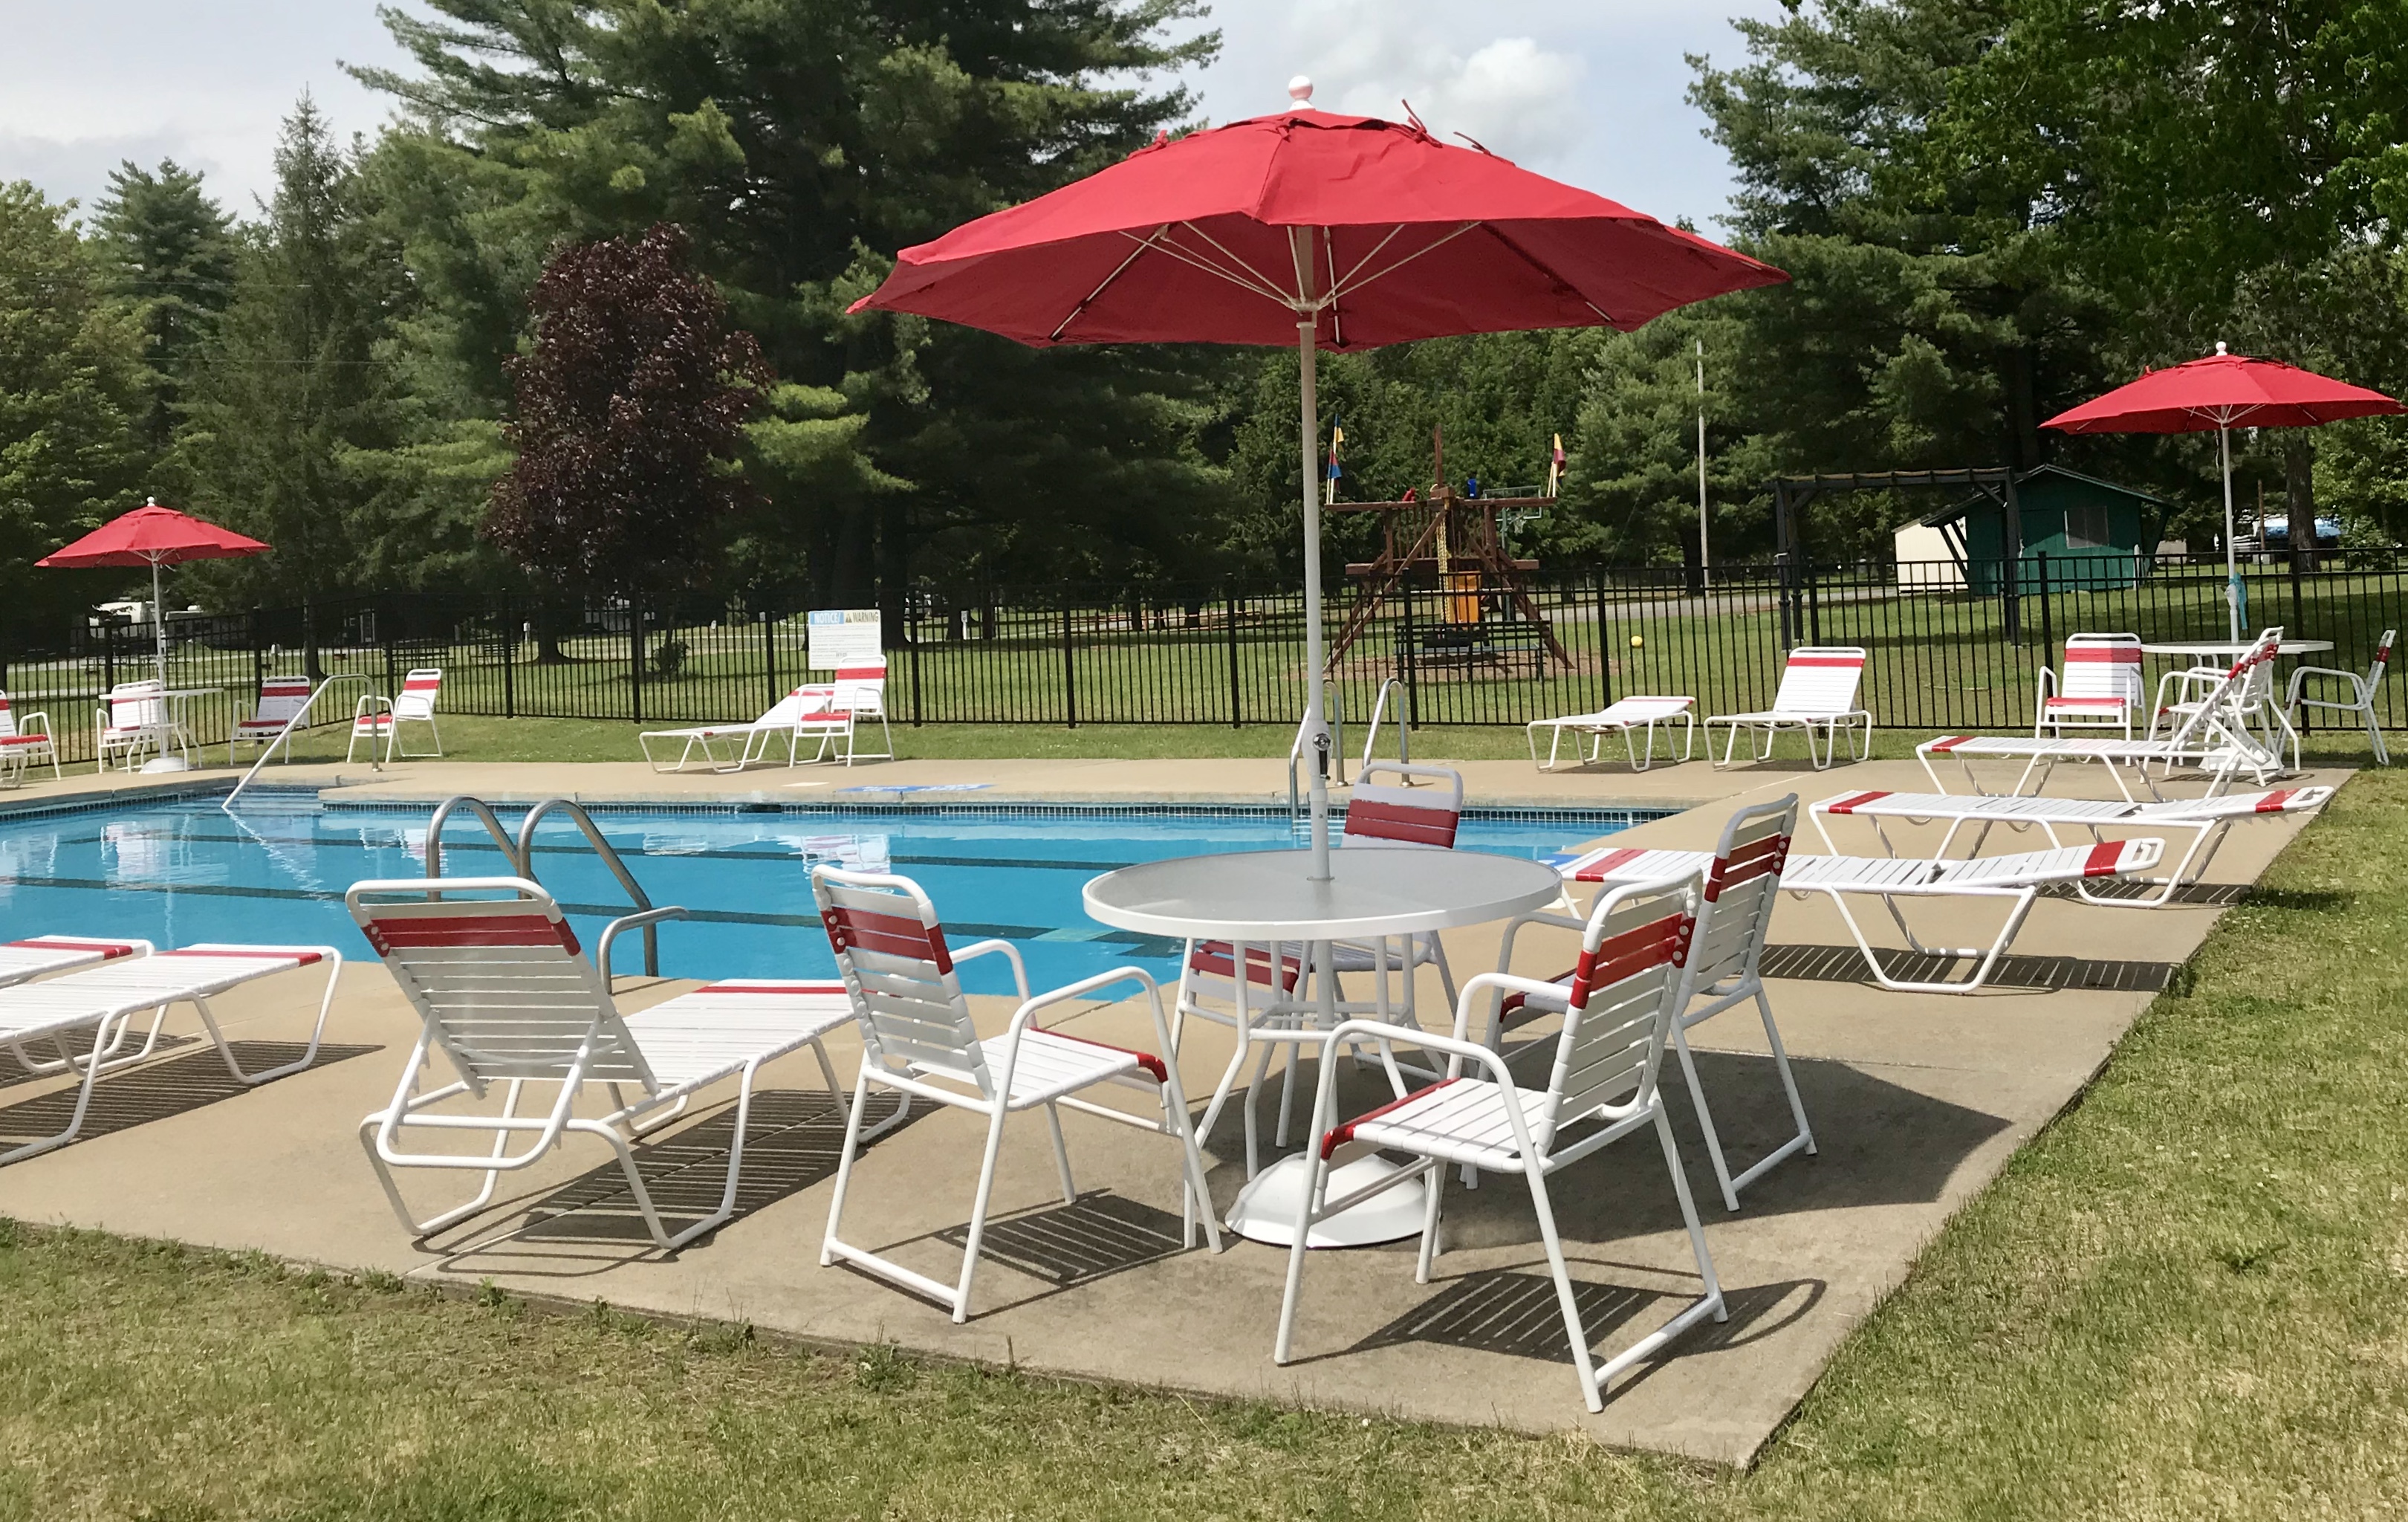 Saratoga RV Park pool and patio area with table amd red umbrellas around the pool